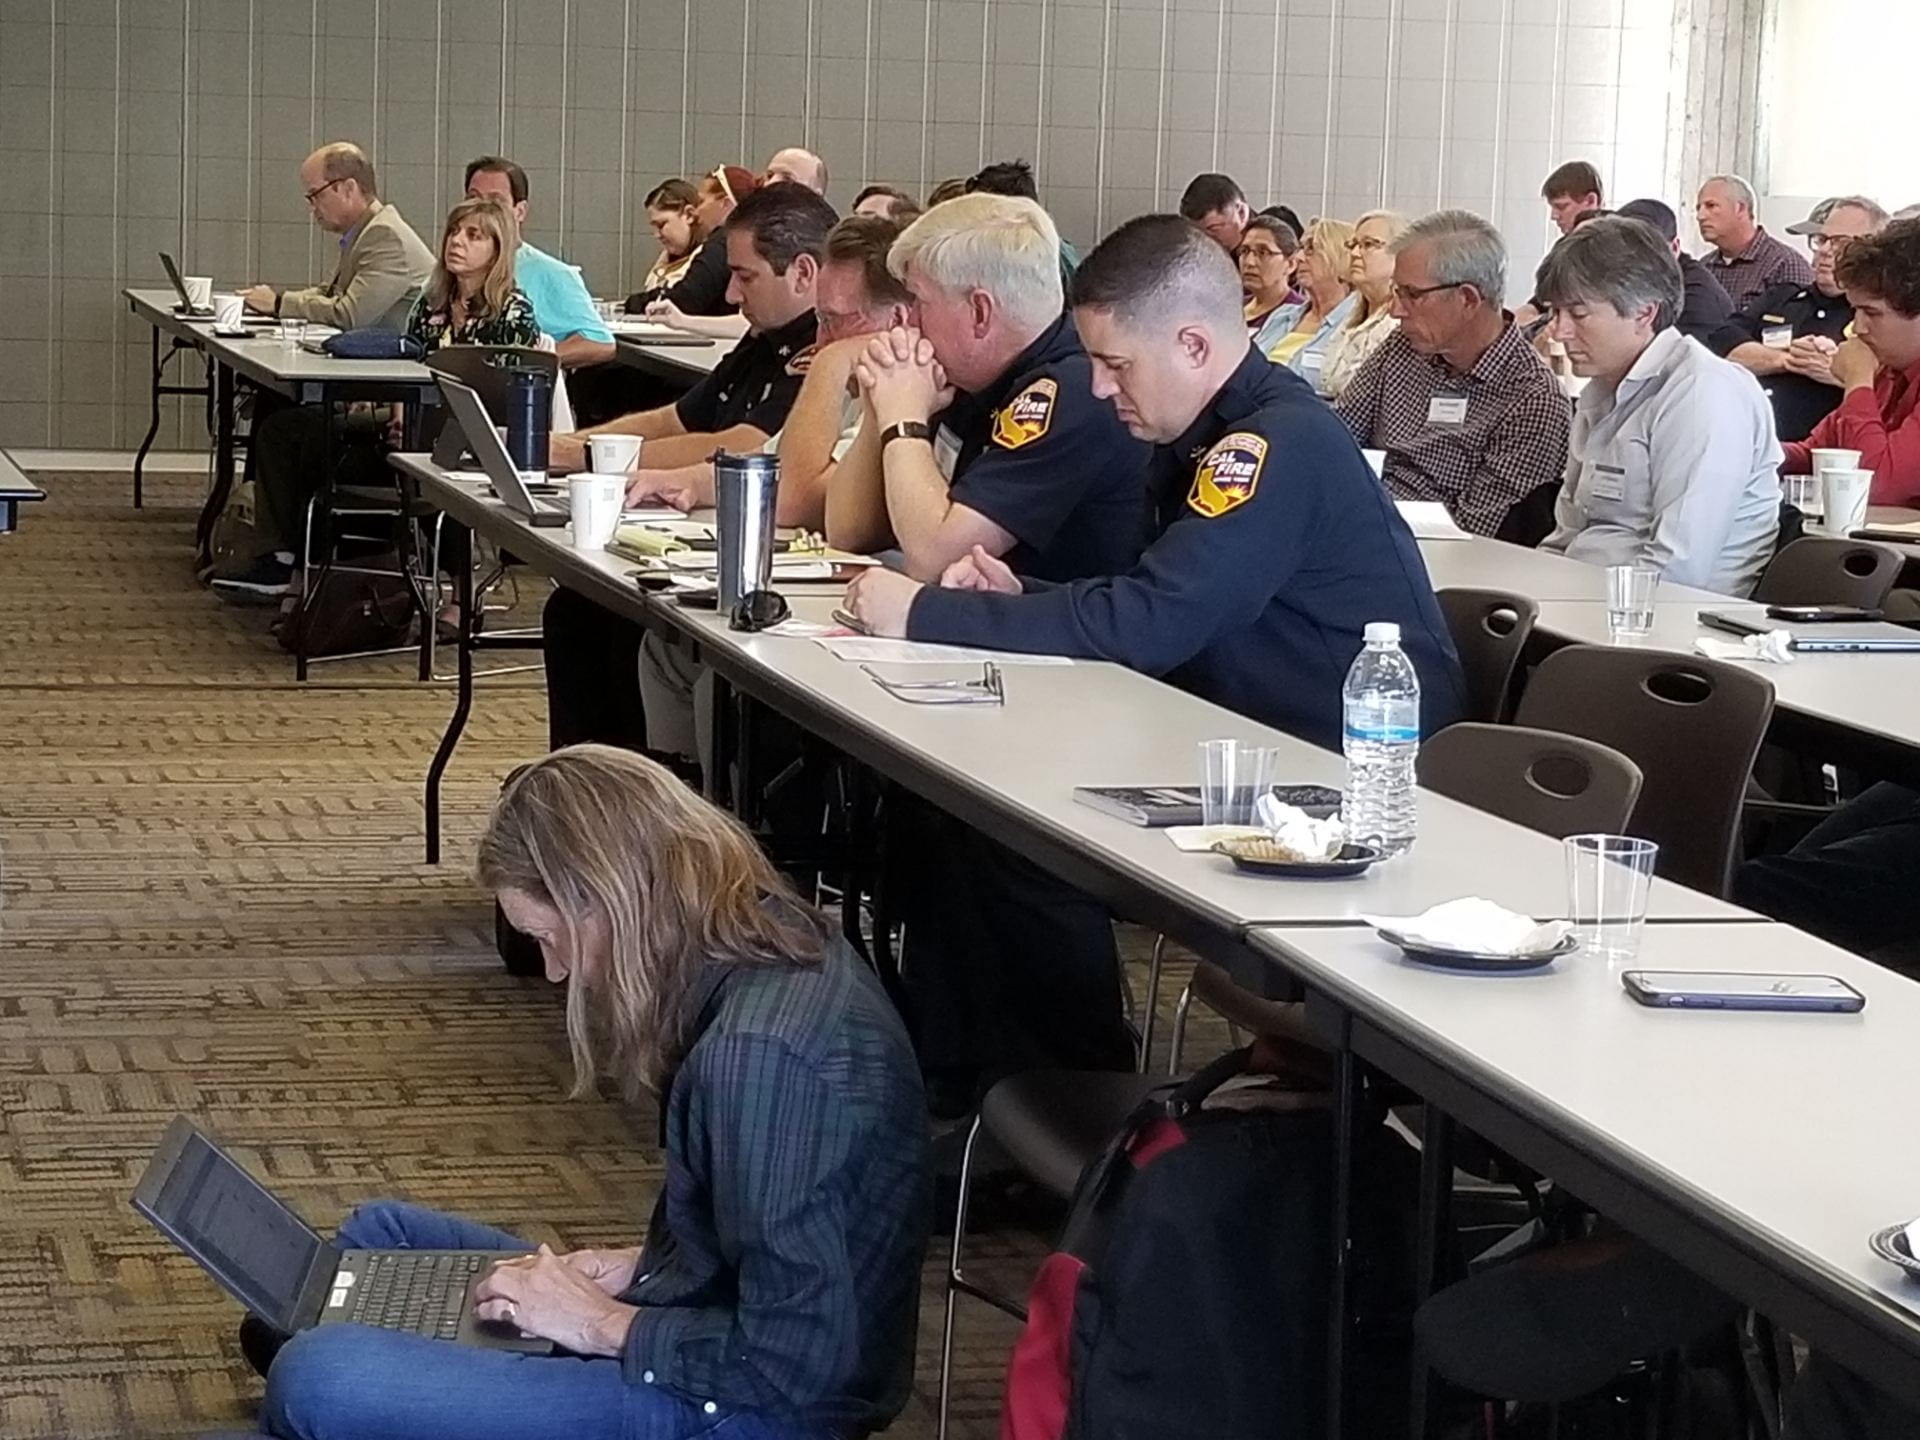 SJSU's first-ever Fire Weather Research Workshop drew fire agencies, community members and others to learn about the latest scientific research on fire weather.